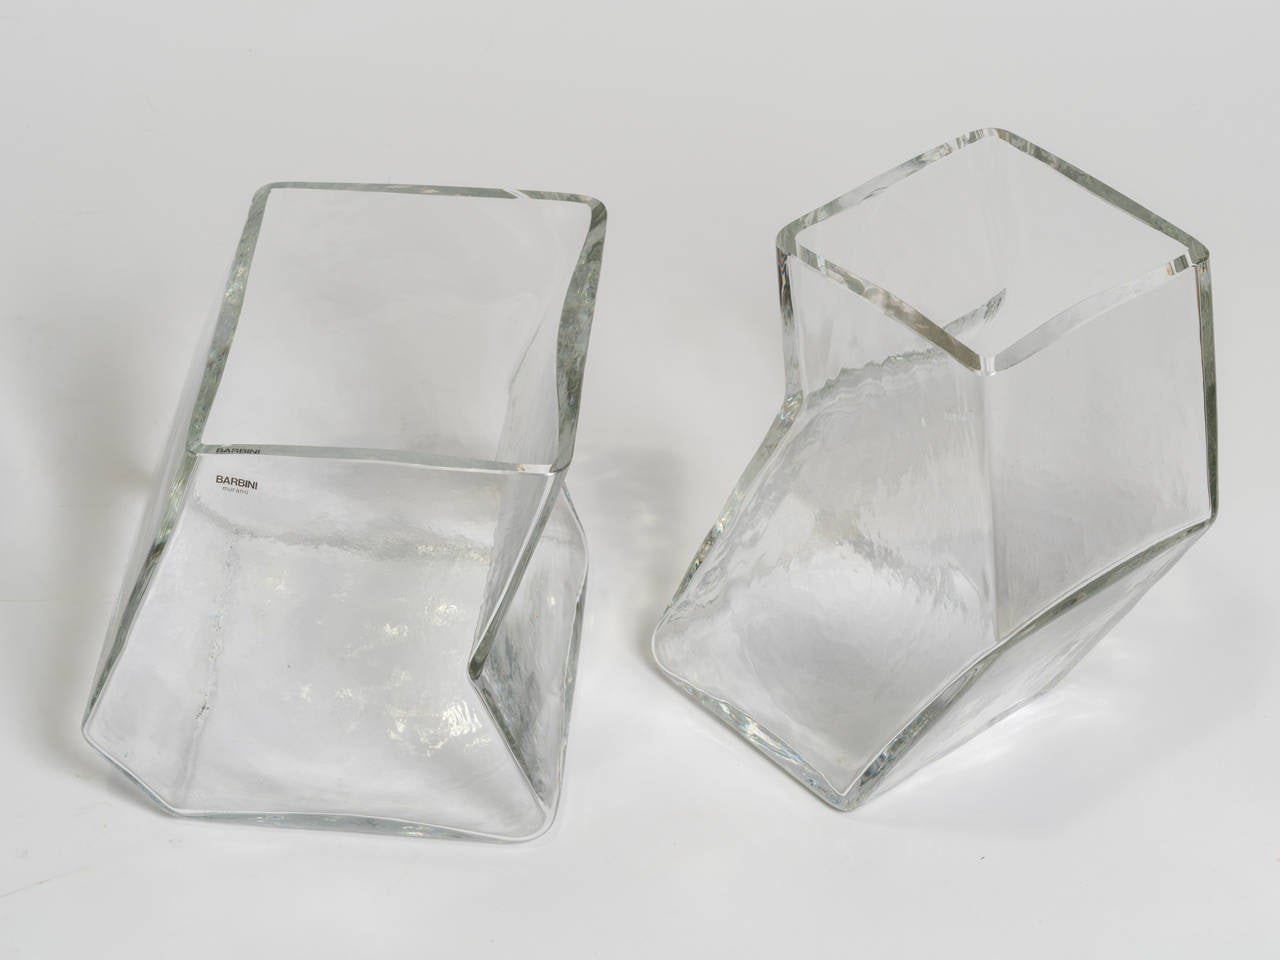 Italian Large Pair of Vintage Architectural Glass Vases, Signed Barbini For Sale